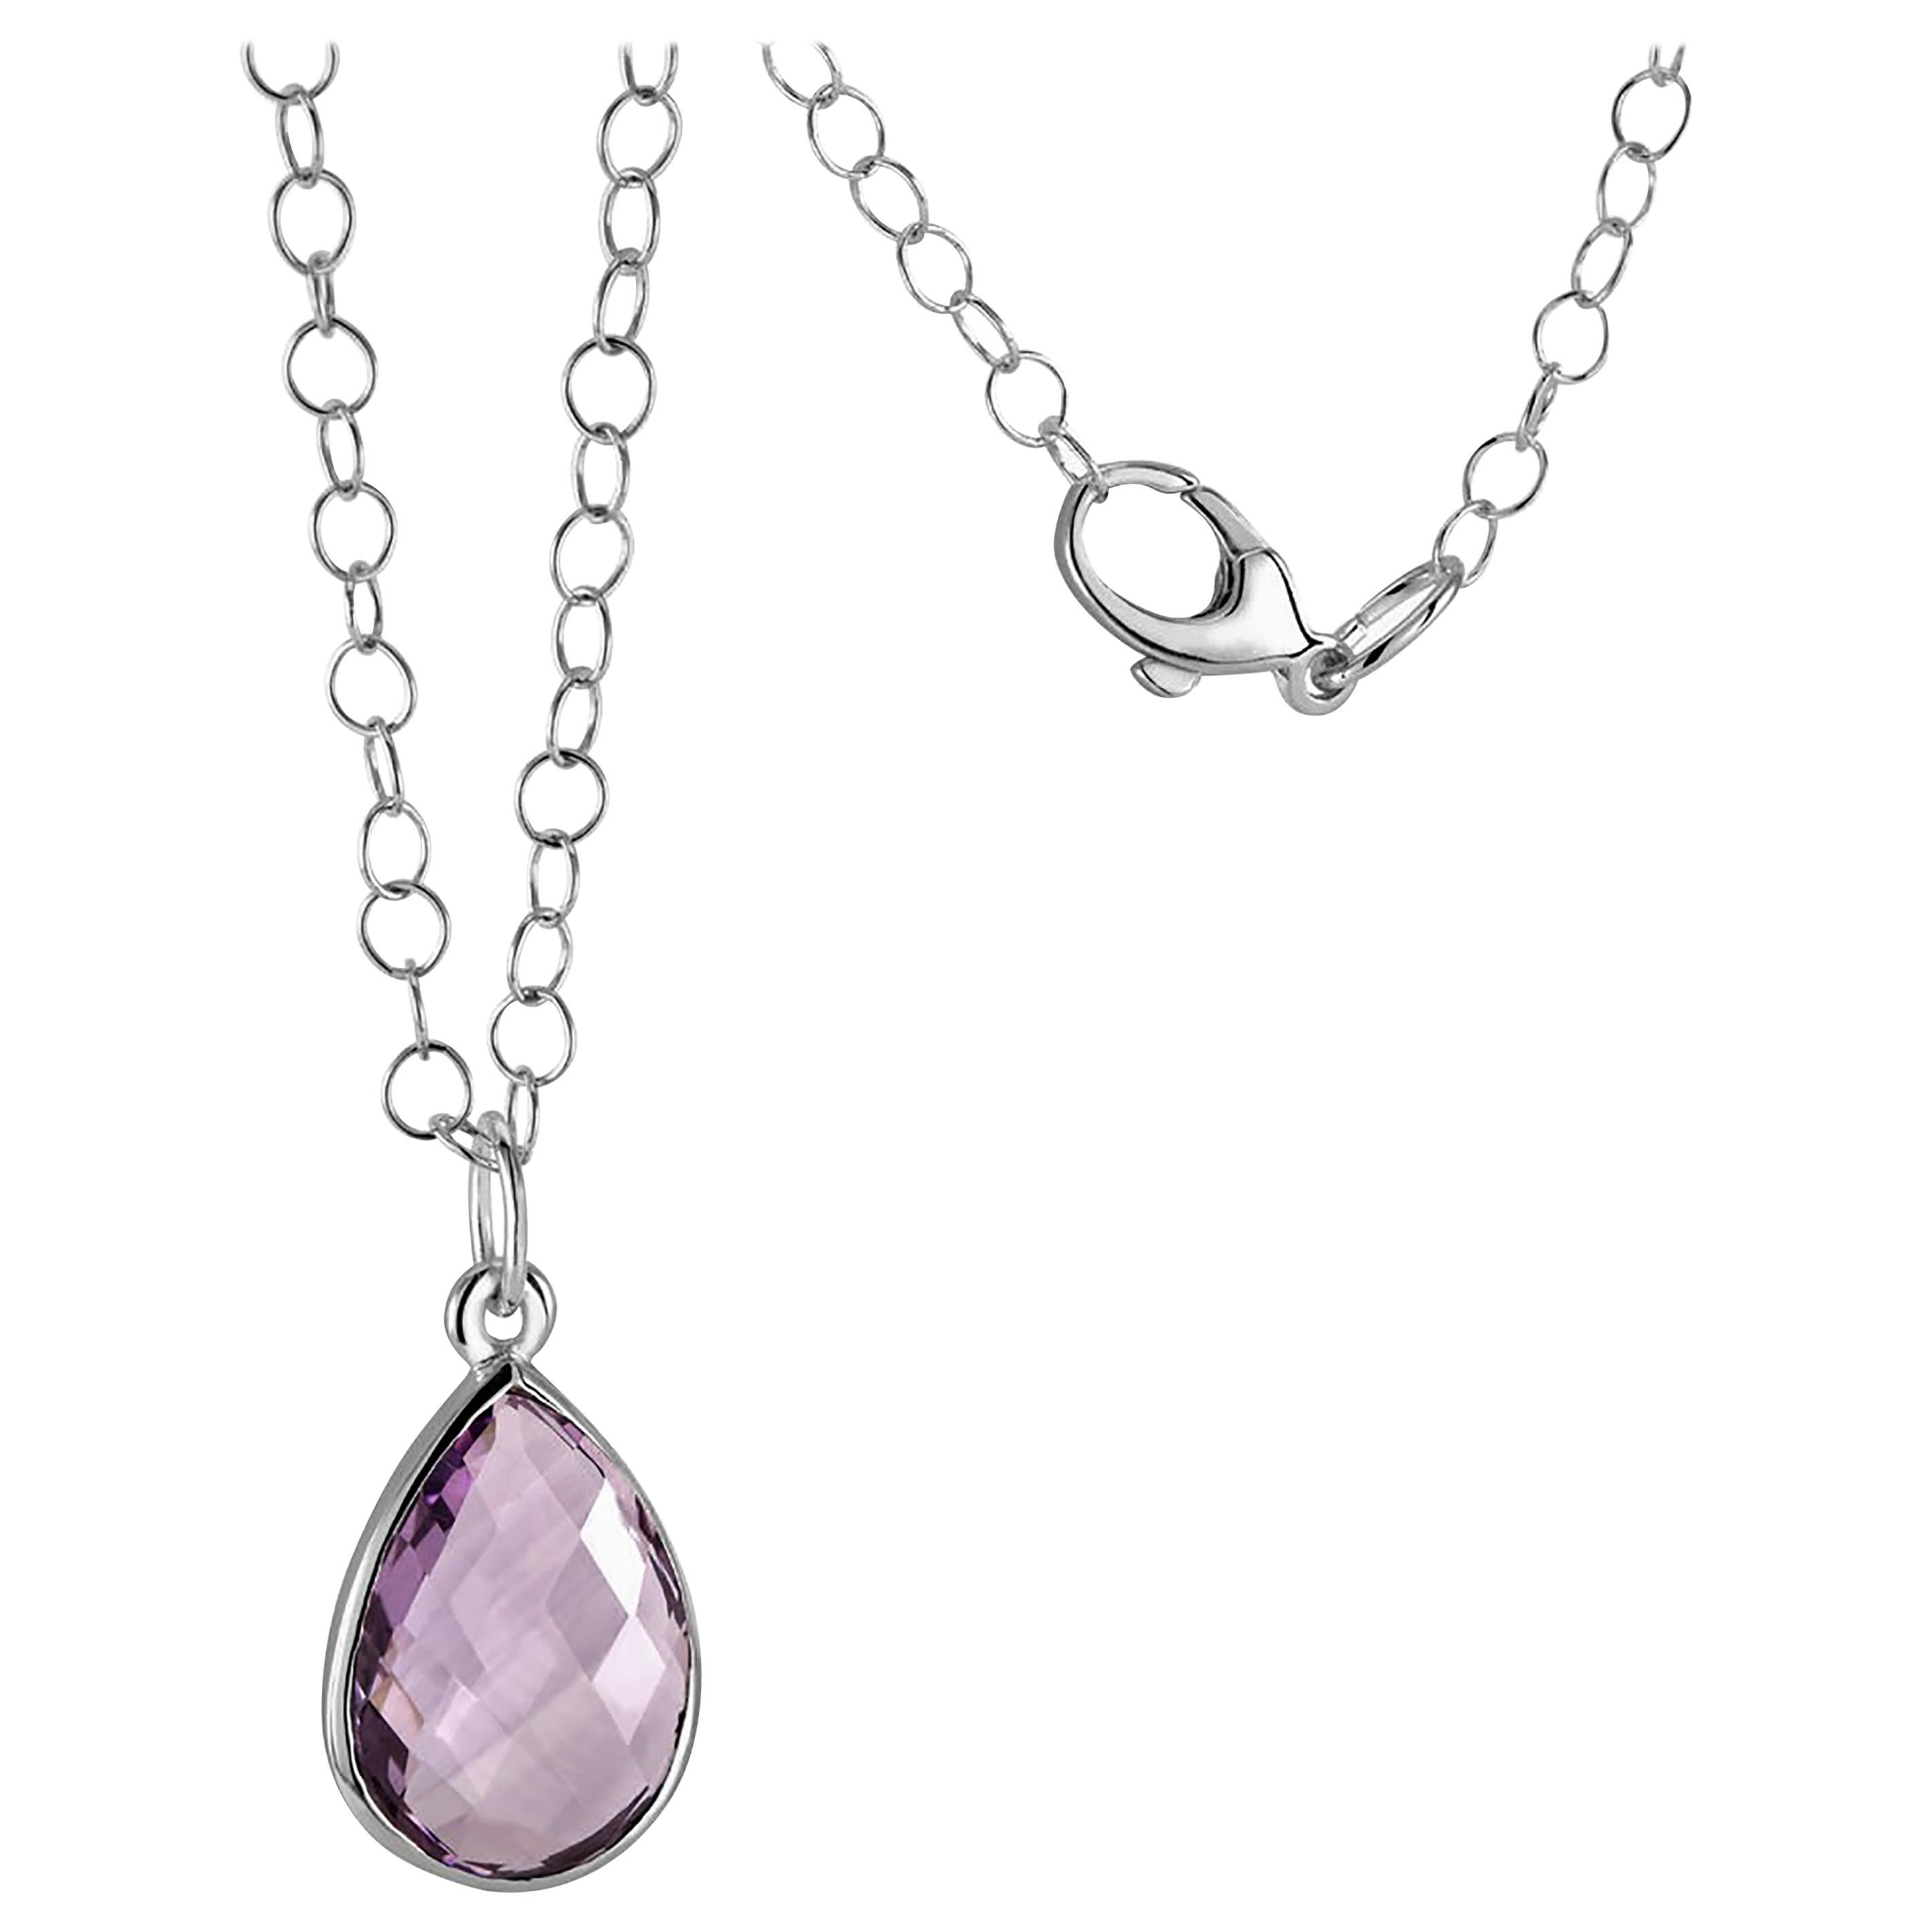 Double Sided Briolette Pear Shaped Amethyst Silver Pendant Necklace